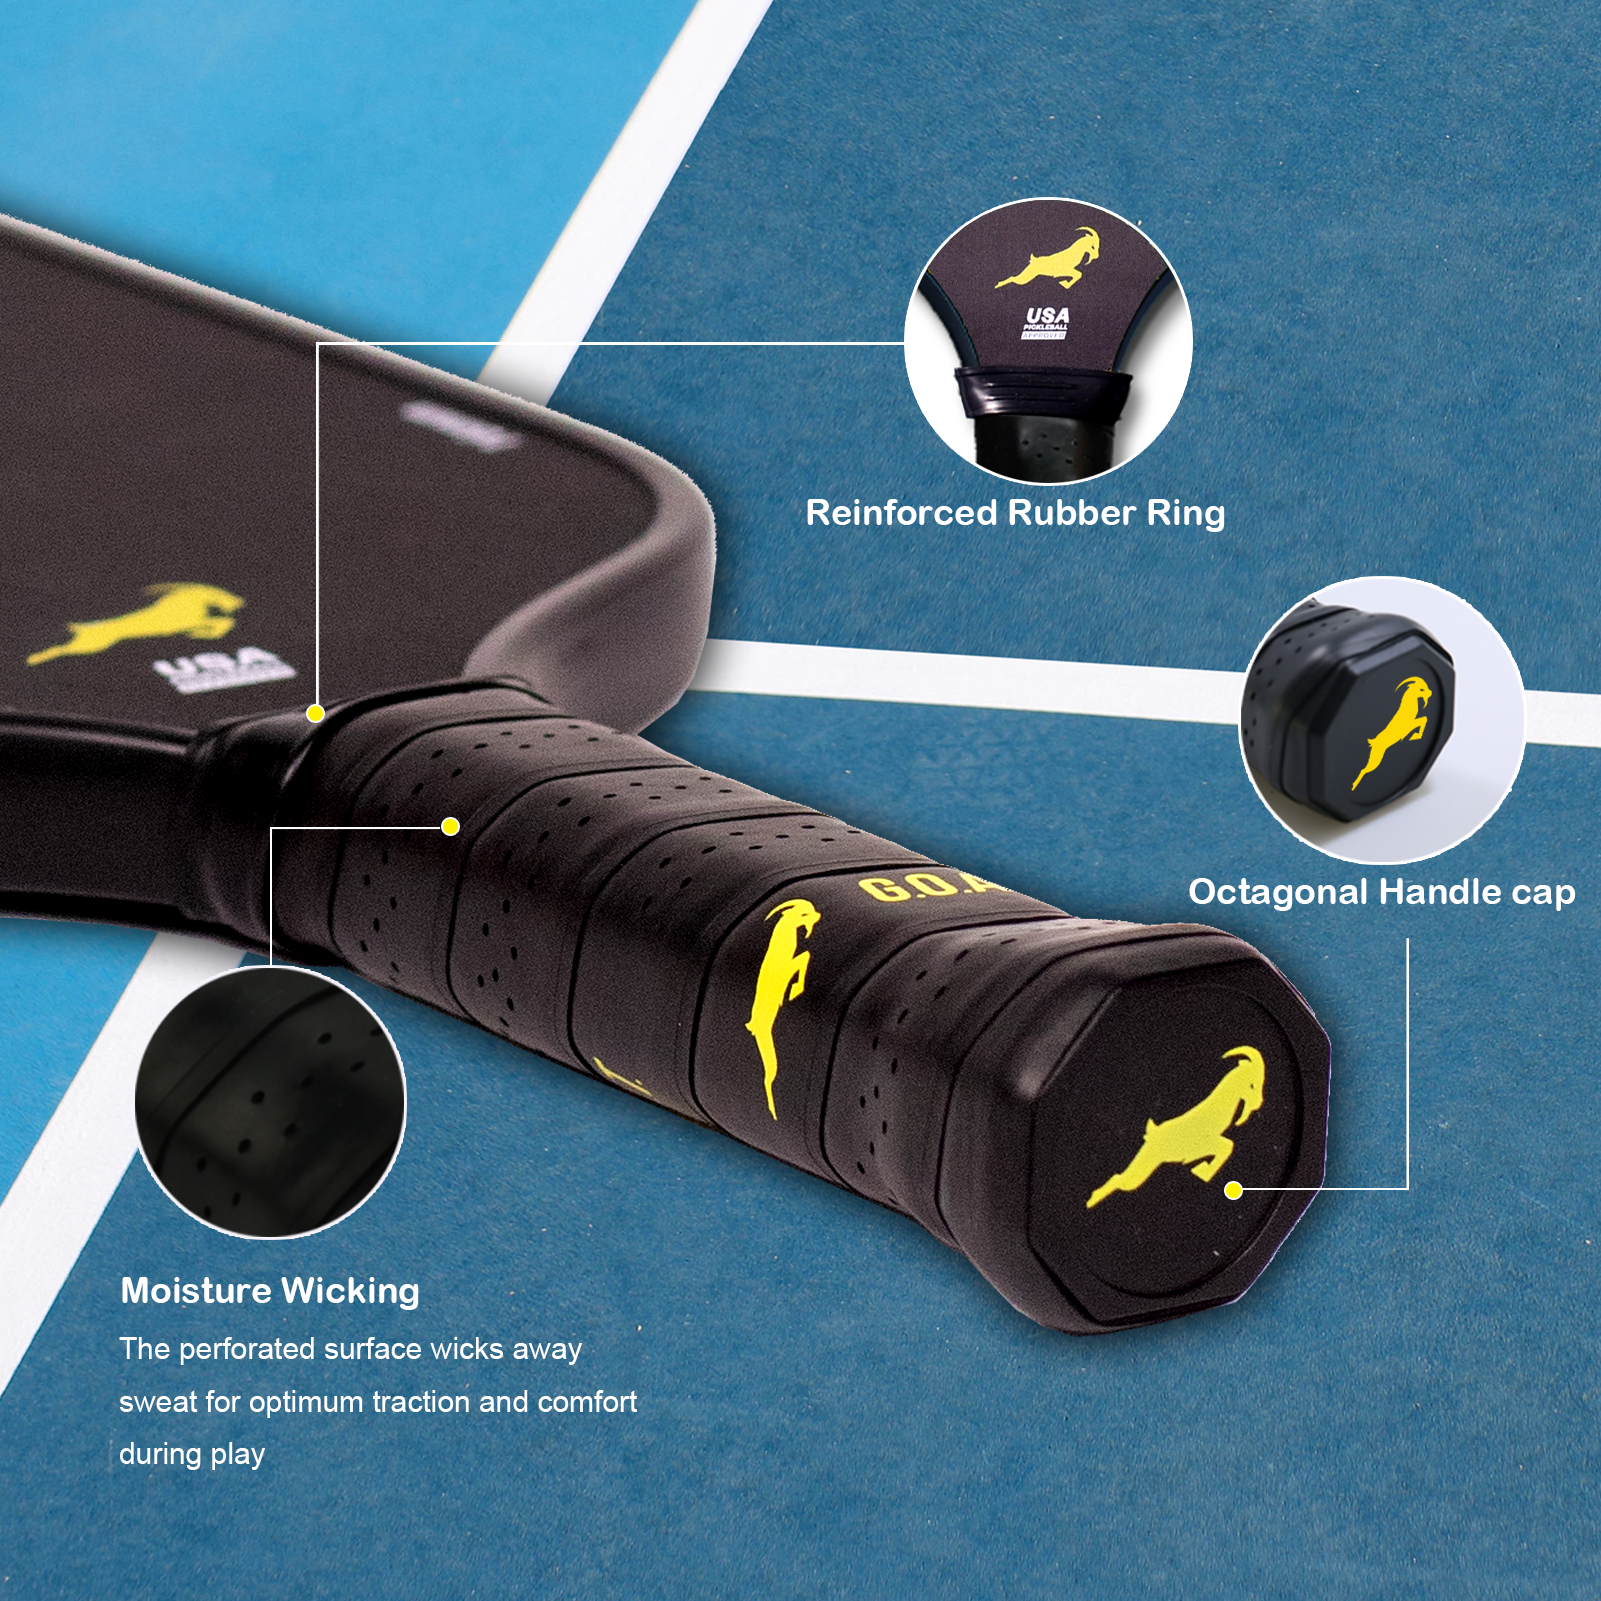 GOAT Control Pickleball Paddles: Octagonal handle, blue/black accents, gray cap. Back with rubber rings, goat logo. 'Moisture Wicking', 'Reinforced Rubber Ring'